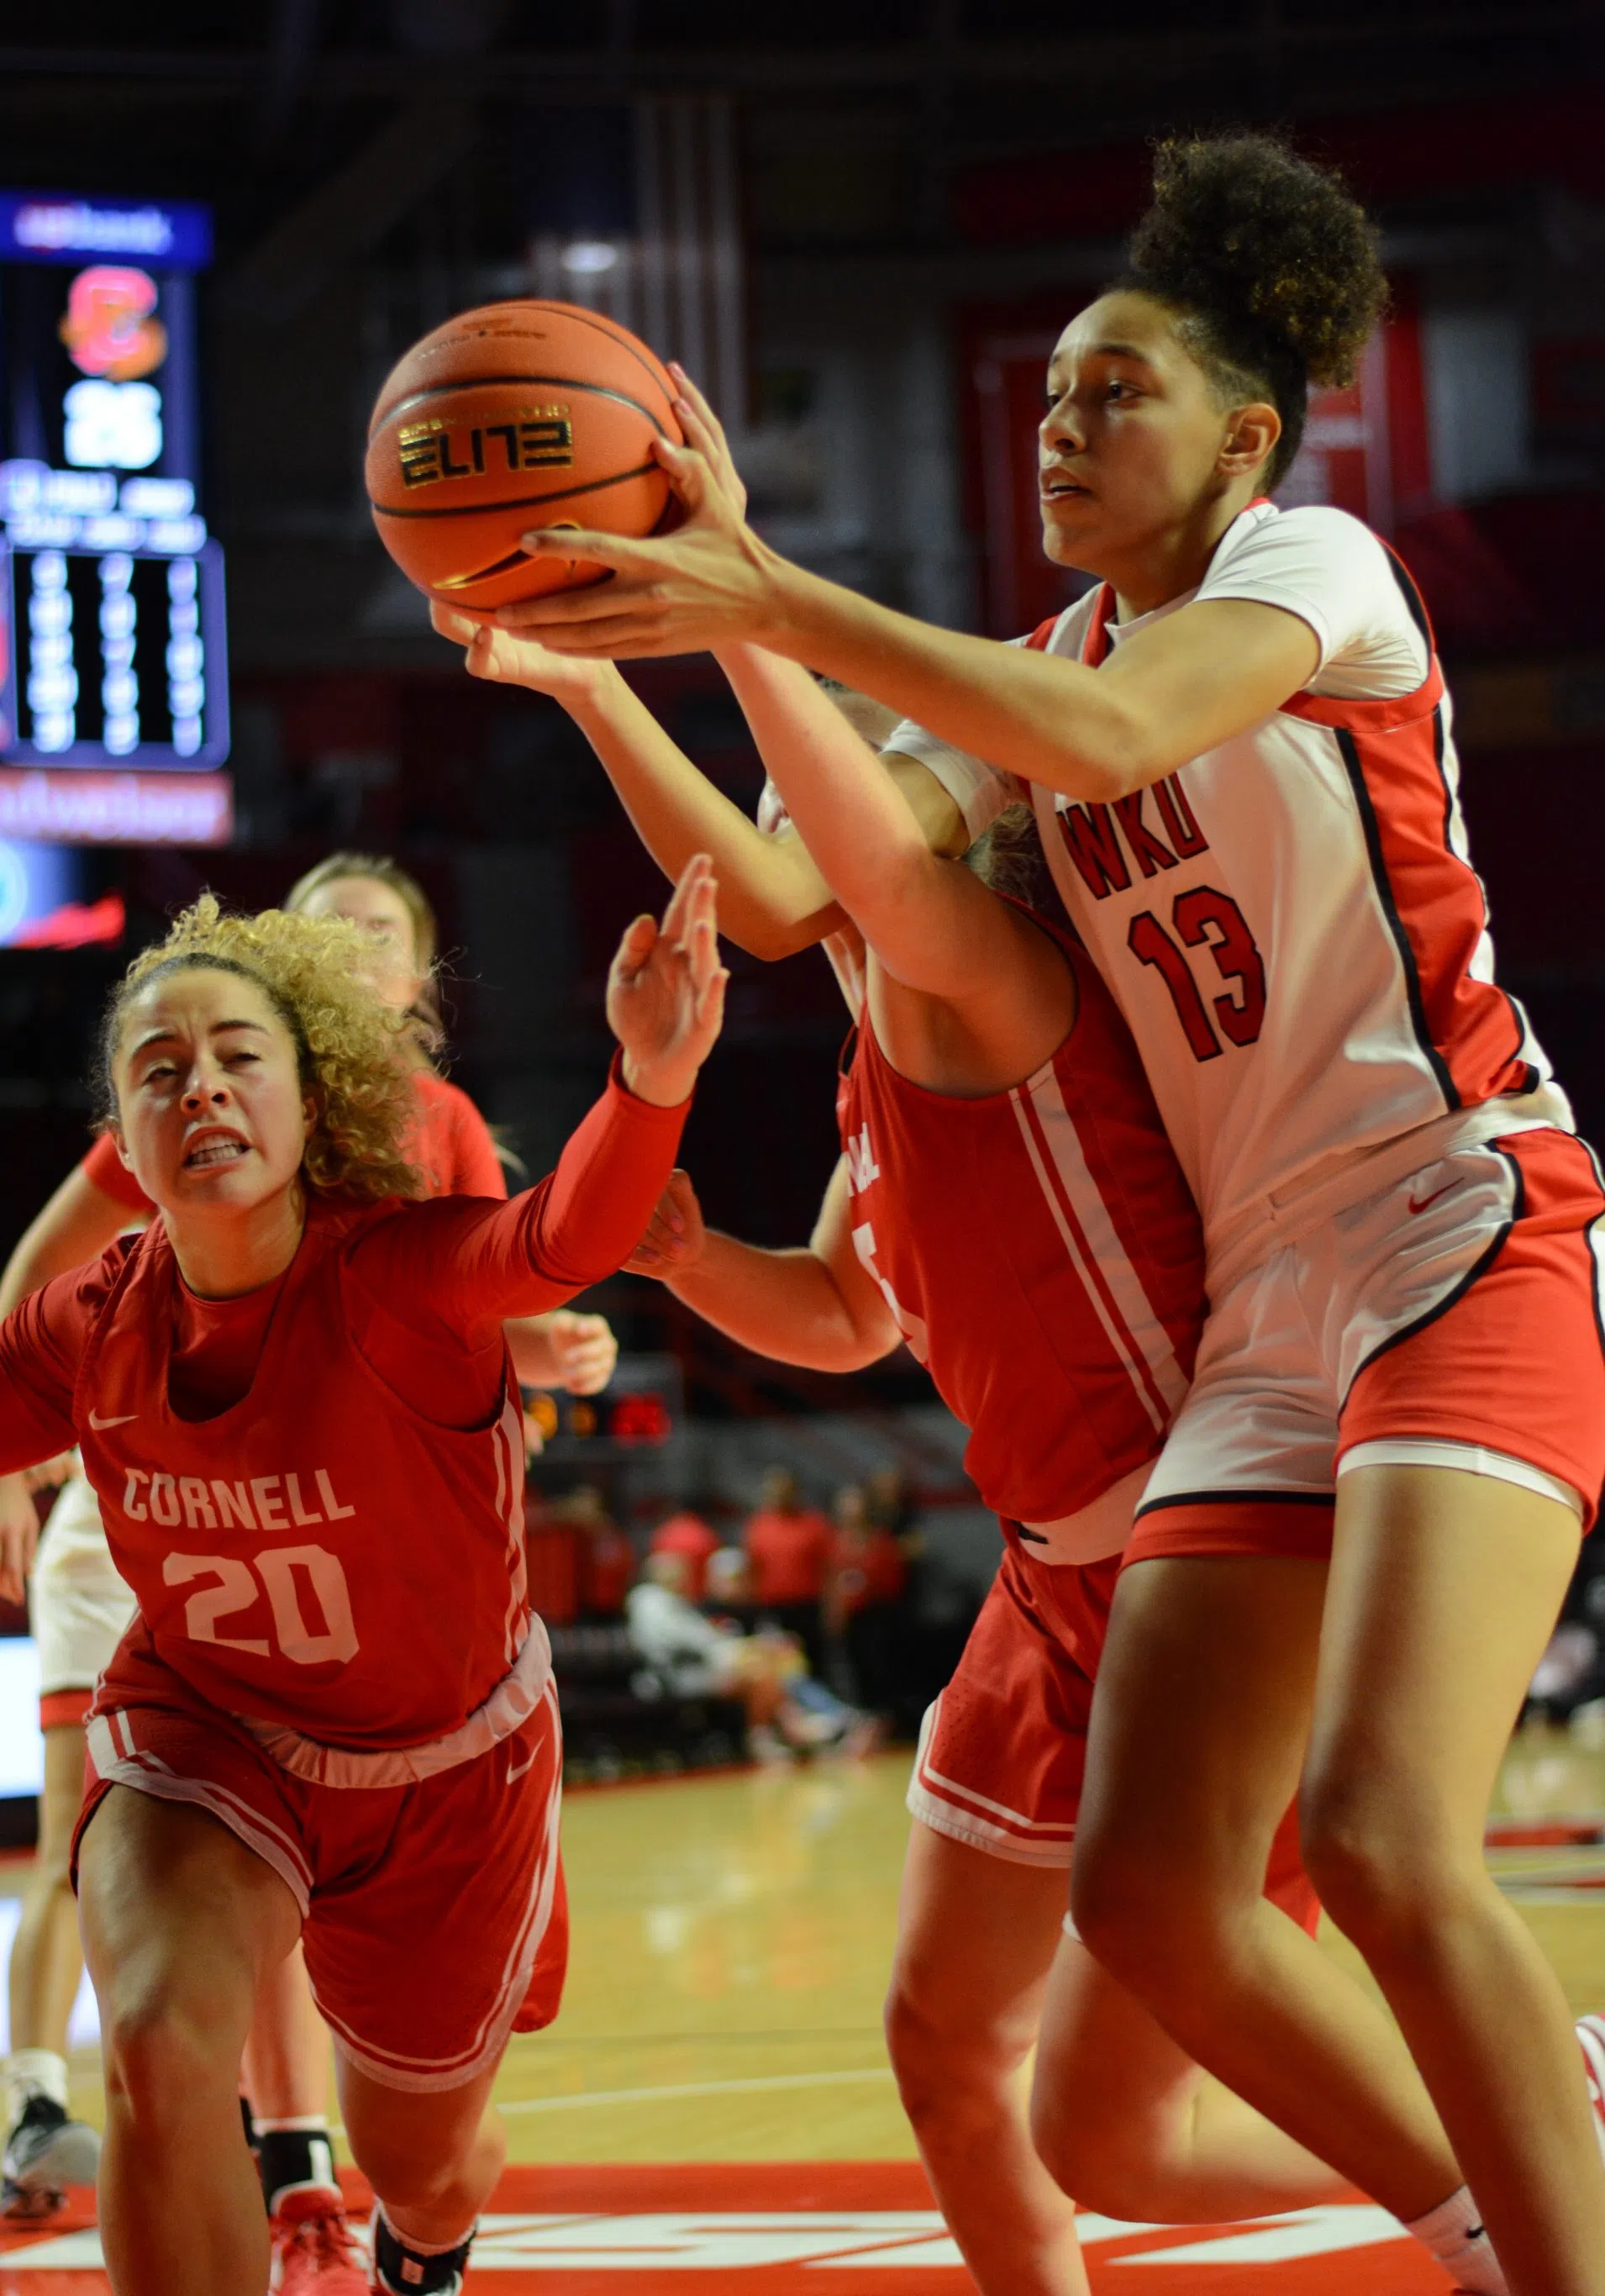 GALLERY: Lady Toppers hold off Cornell, 62-56